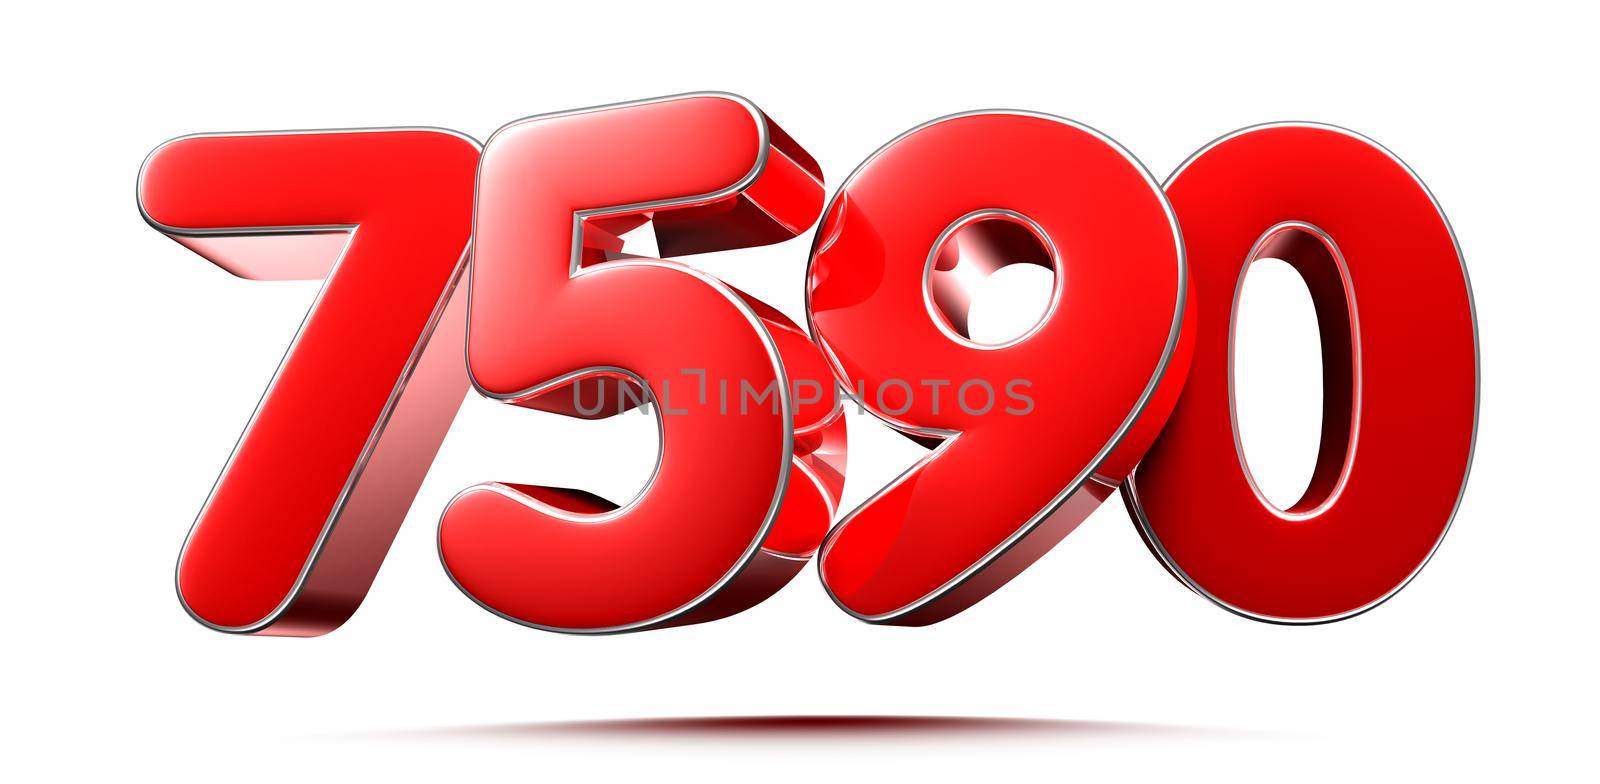 Rounded red numbers 7590 on white background 3D illustration with clipping path by thitimontoyai